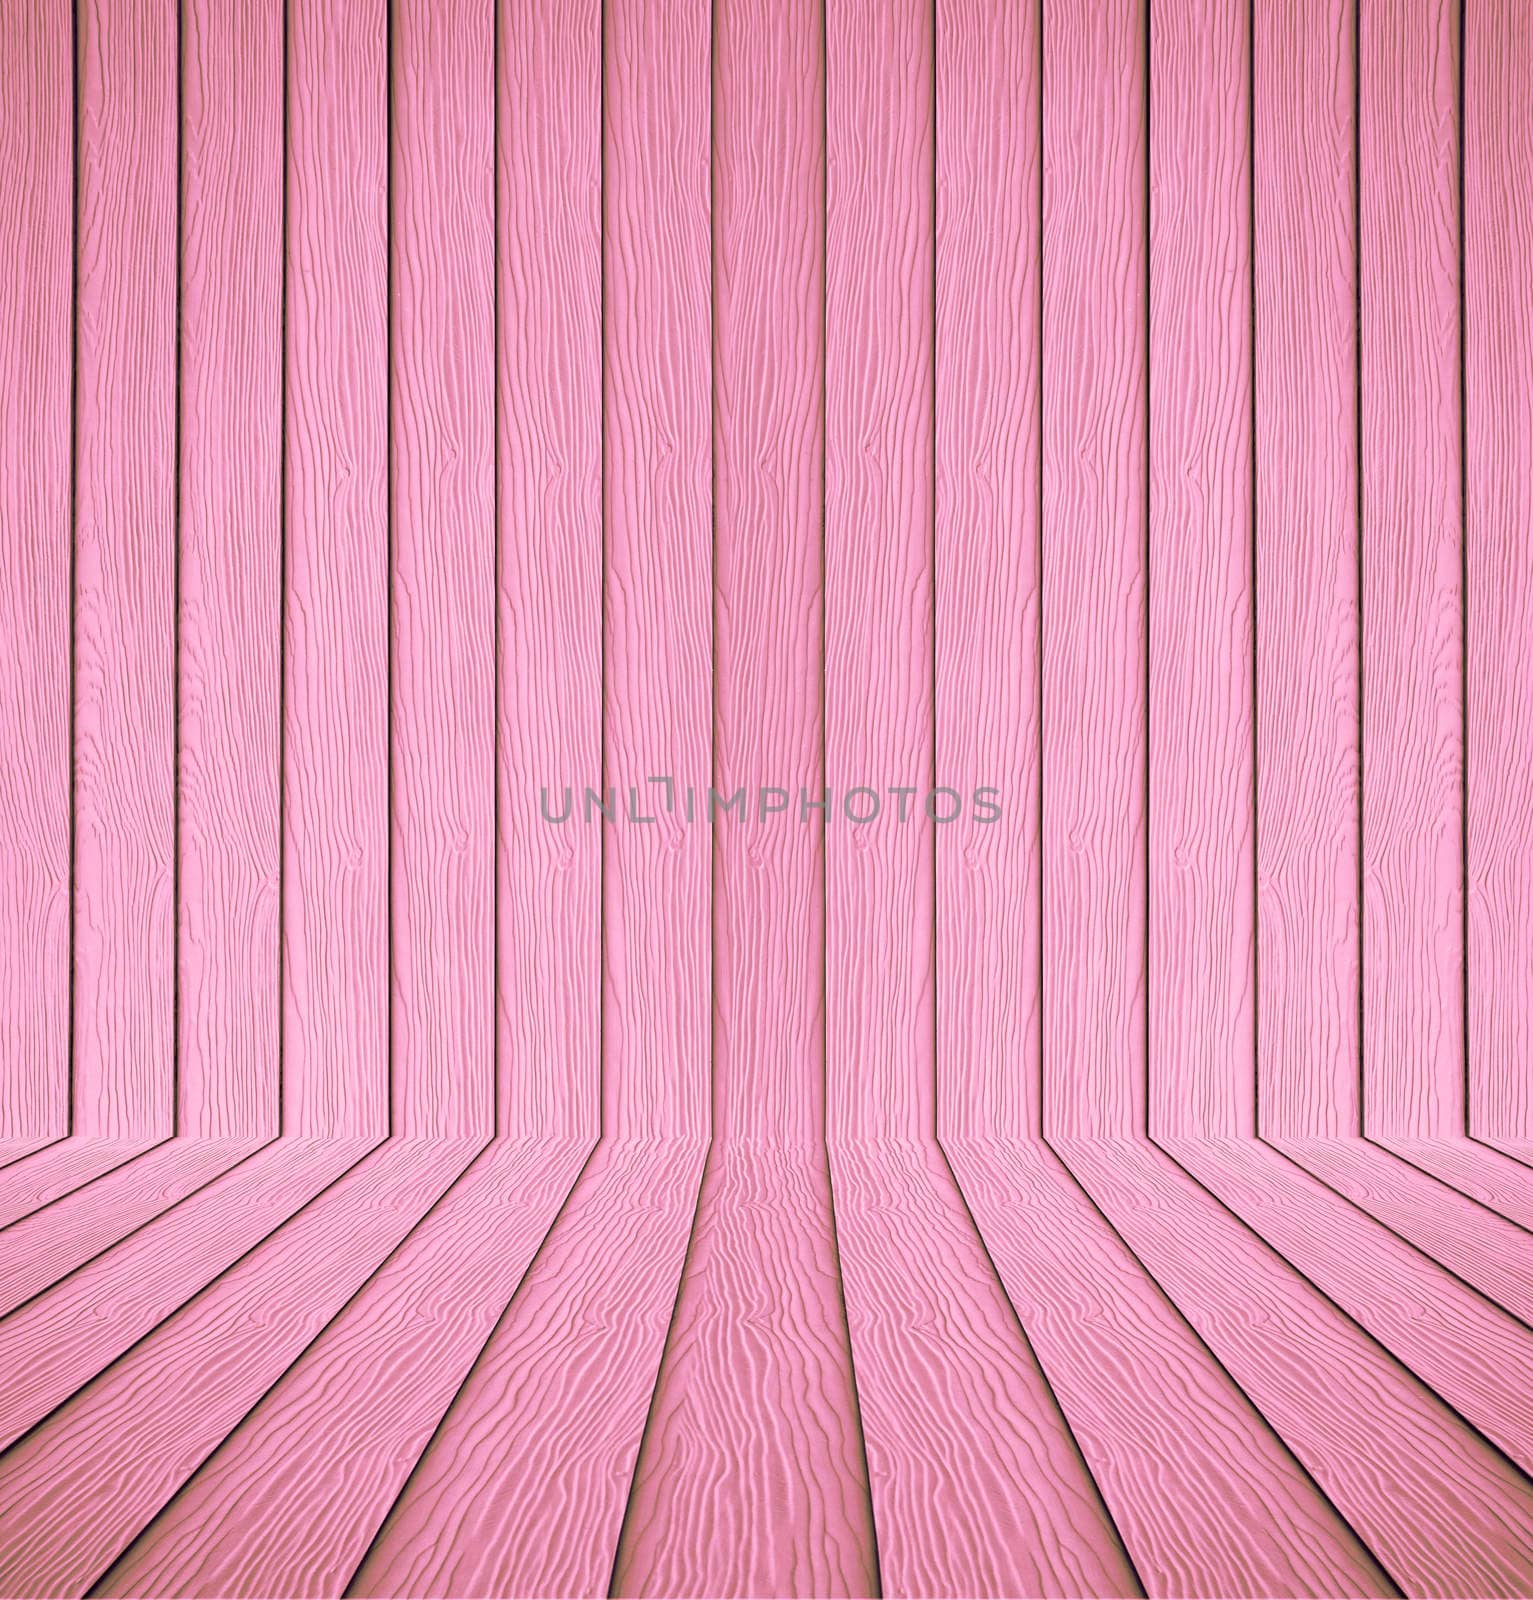 Red Wood texture background